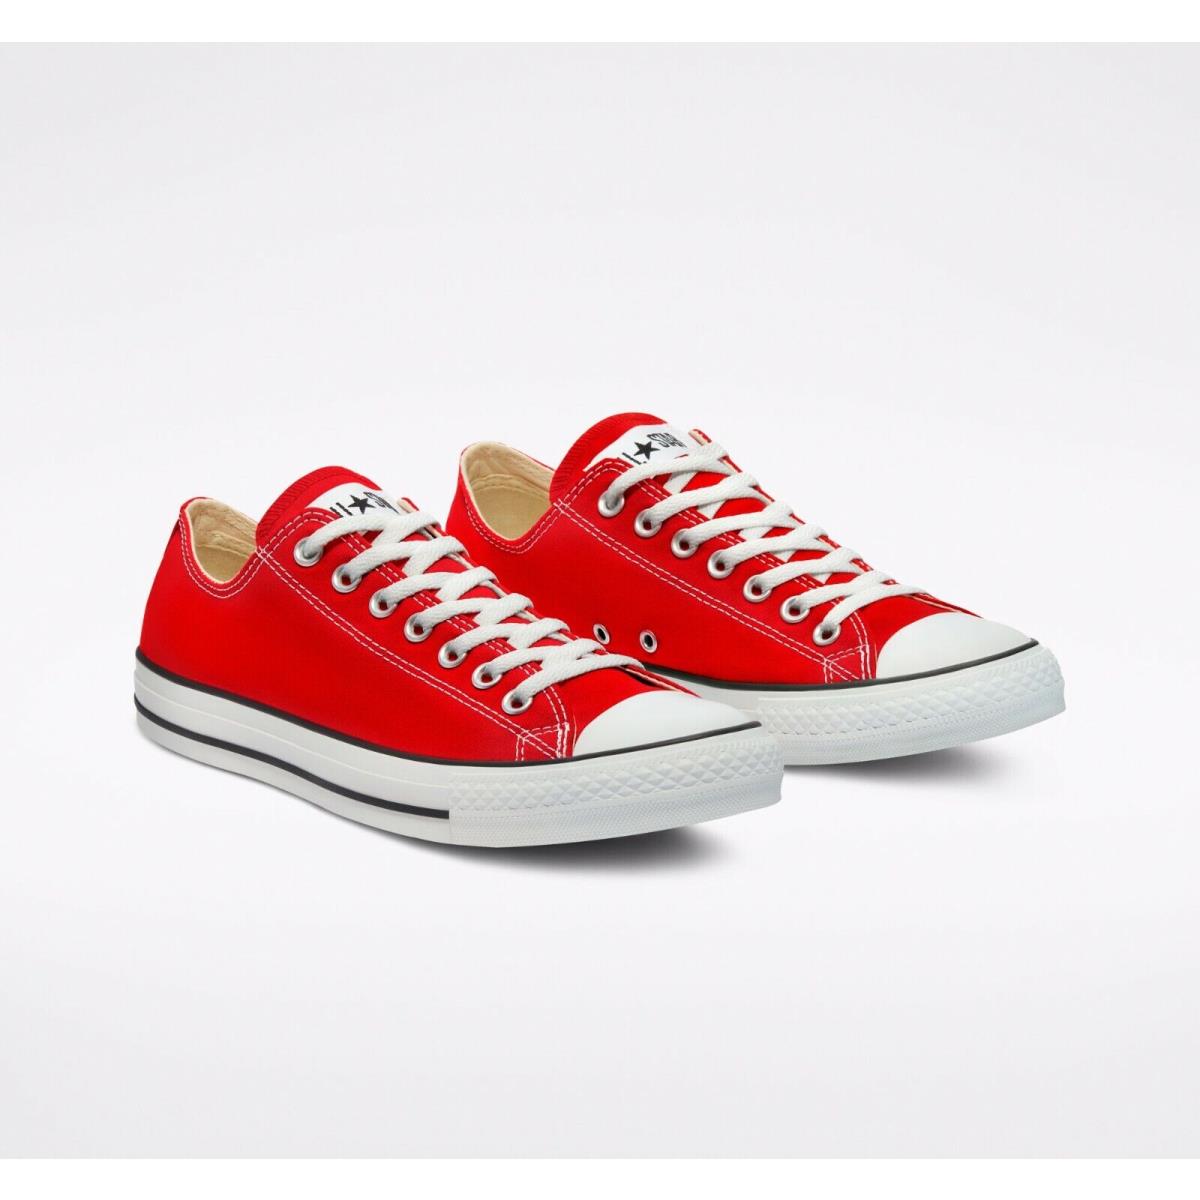 Converse Unisex Chuck Taylor All Star Low Top Sneaker Shoe Red